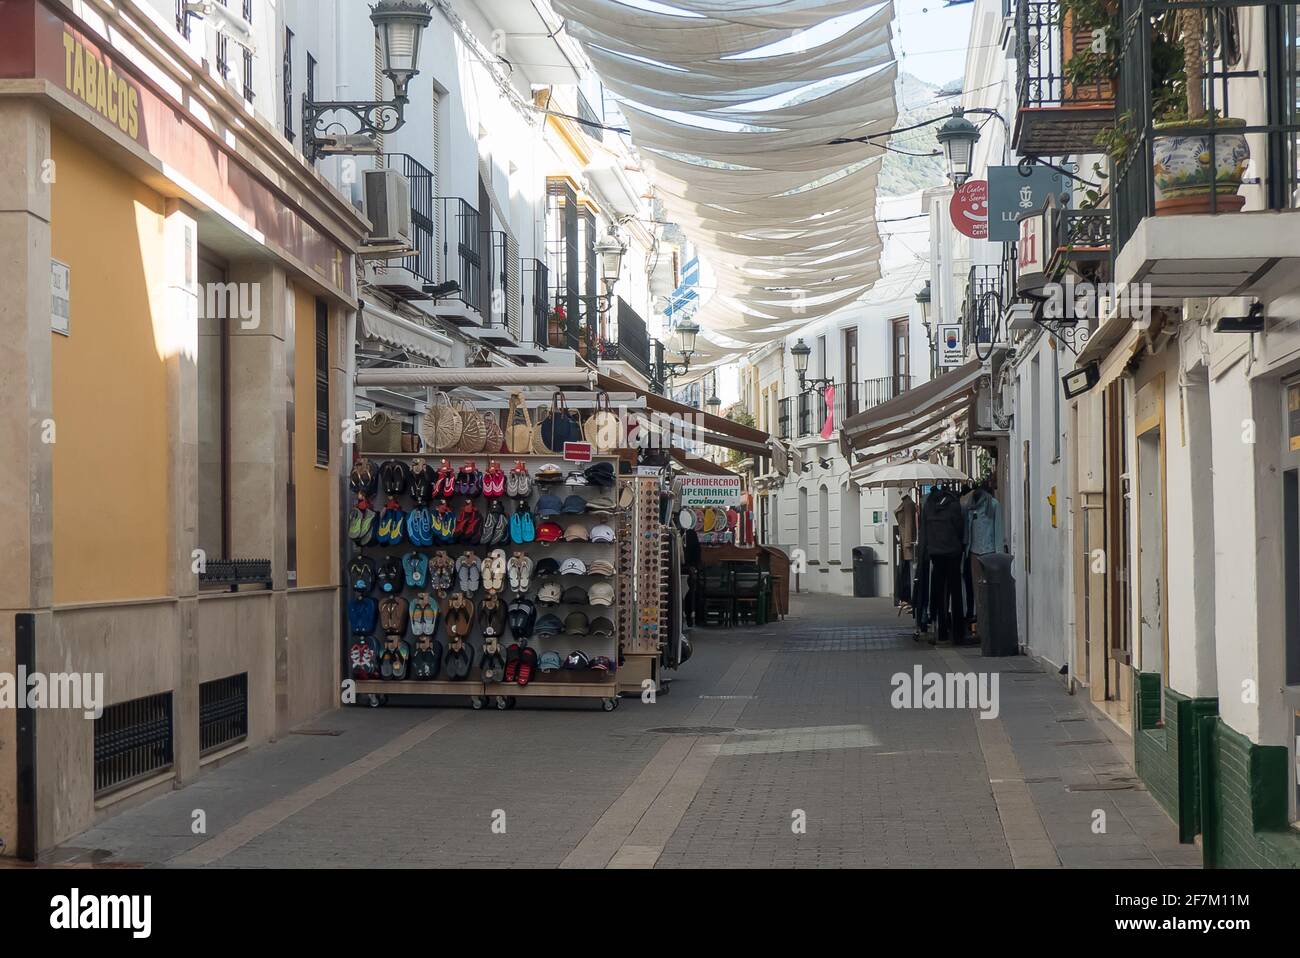 Andalucia in Spain: Nerja's relatively empty streets during the Coranavirus pandemic Stock Photo